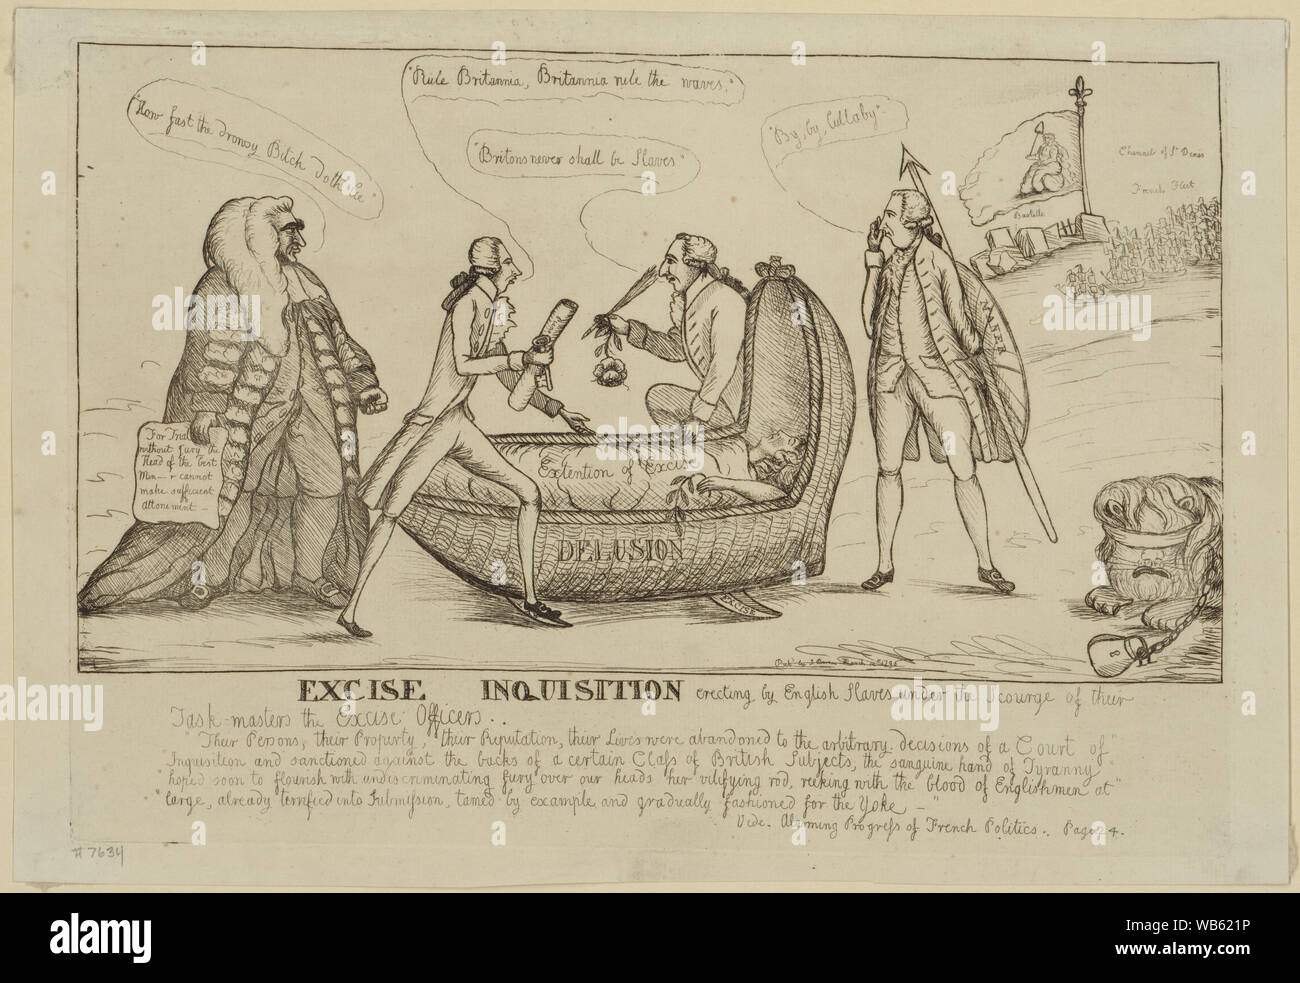 Excise inquisition erecting by English slaves under the scourge of their task-masters the excise officers Abstract: A British satire on an attempt by William Pitt and George Rose to transfer to excise law certain import duties; standing in opposition is Edward Thurlow. The central image shows Britannia, wrapped in a blanket labeled Extension of Excise, being rocked to sleep in a cradle by Pitt and Rose. Another man, possibly William Mainwaring, is holding Britannia's spear and shield which is labeled Maner and saying By, by, lullaby; to the right of his feet is the British lion, blindfolded an Stock Photo